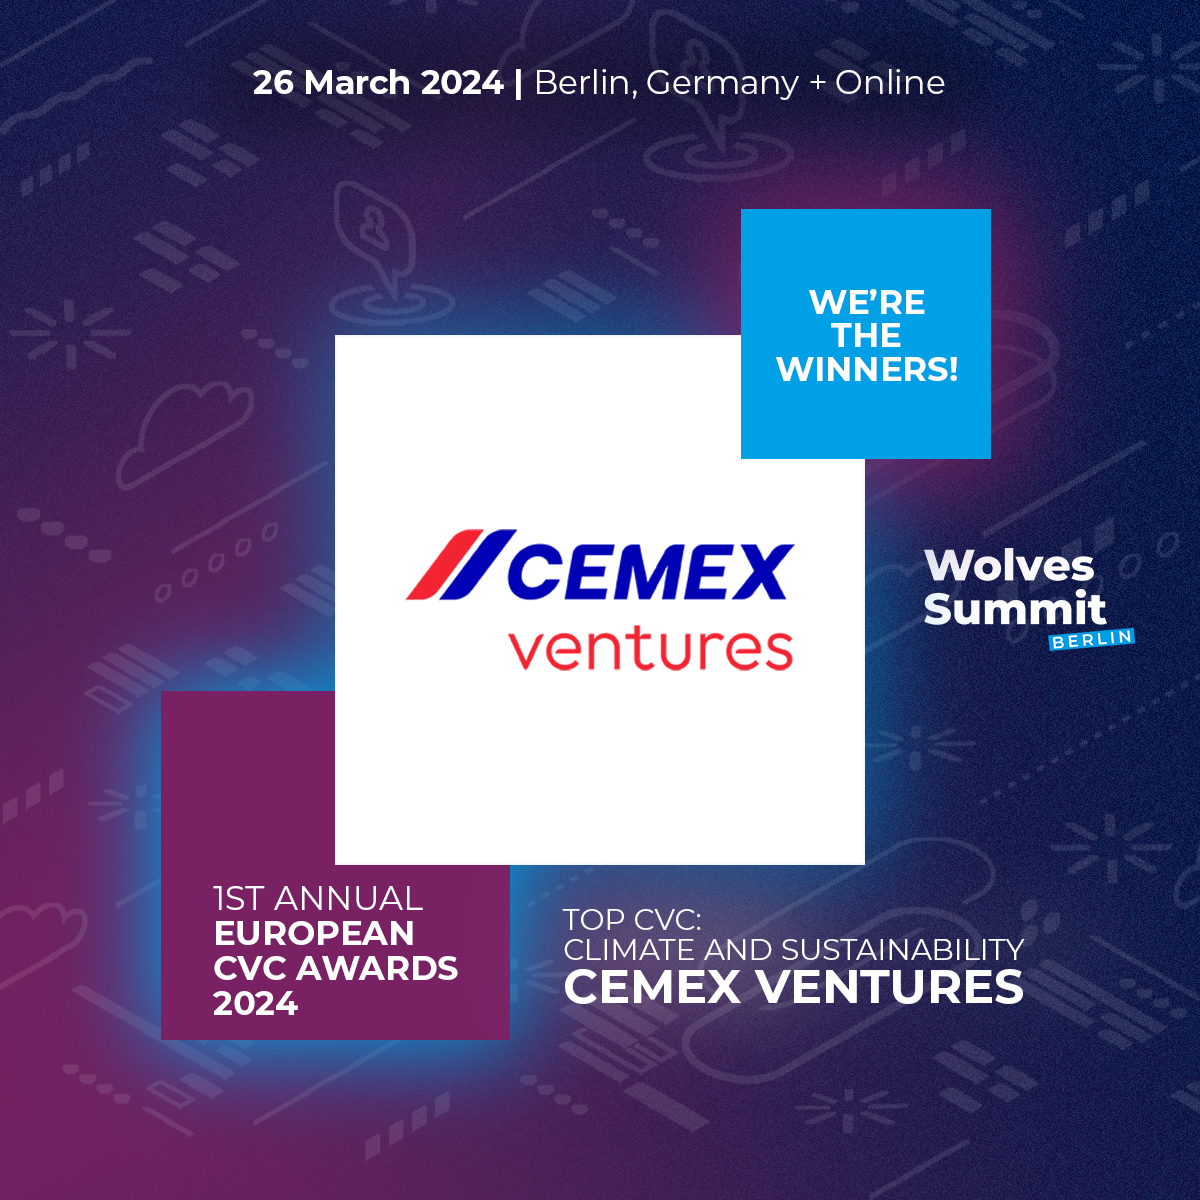 Cemex Ventures has been named the Top European Climate & Sustainability CVC by @WolvesSummit ! 🏆 The awards recognize the top Corporate #VentureCapital firms and our work in investing in #Cleantech startups to foster the construction revolution and build a more sustainable